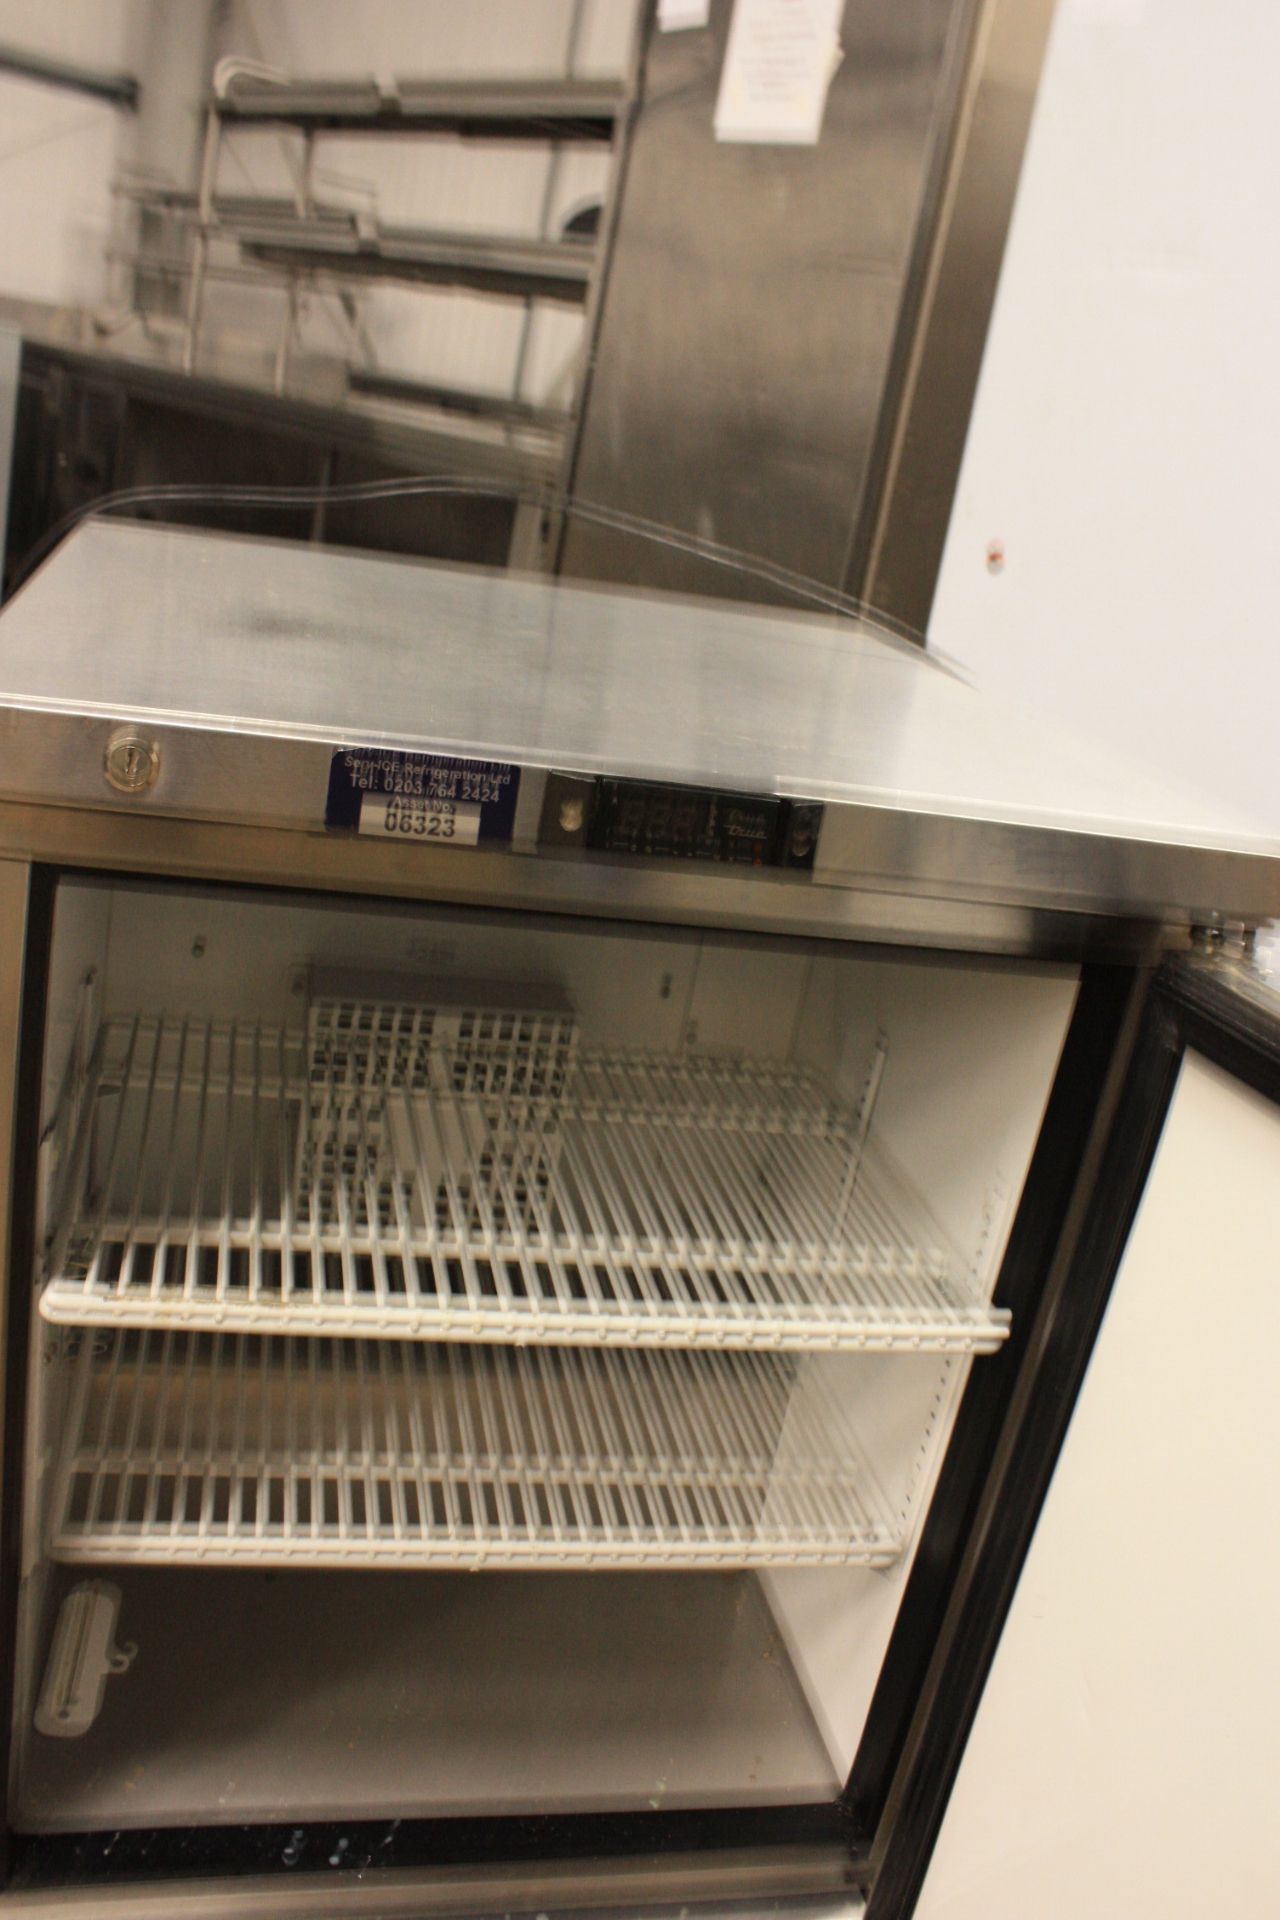 True Undercounter Freezer all stainless steel. Width 610mm x depth 630mm x height 840mm. - Image 2 of 2